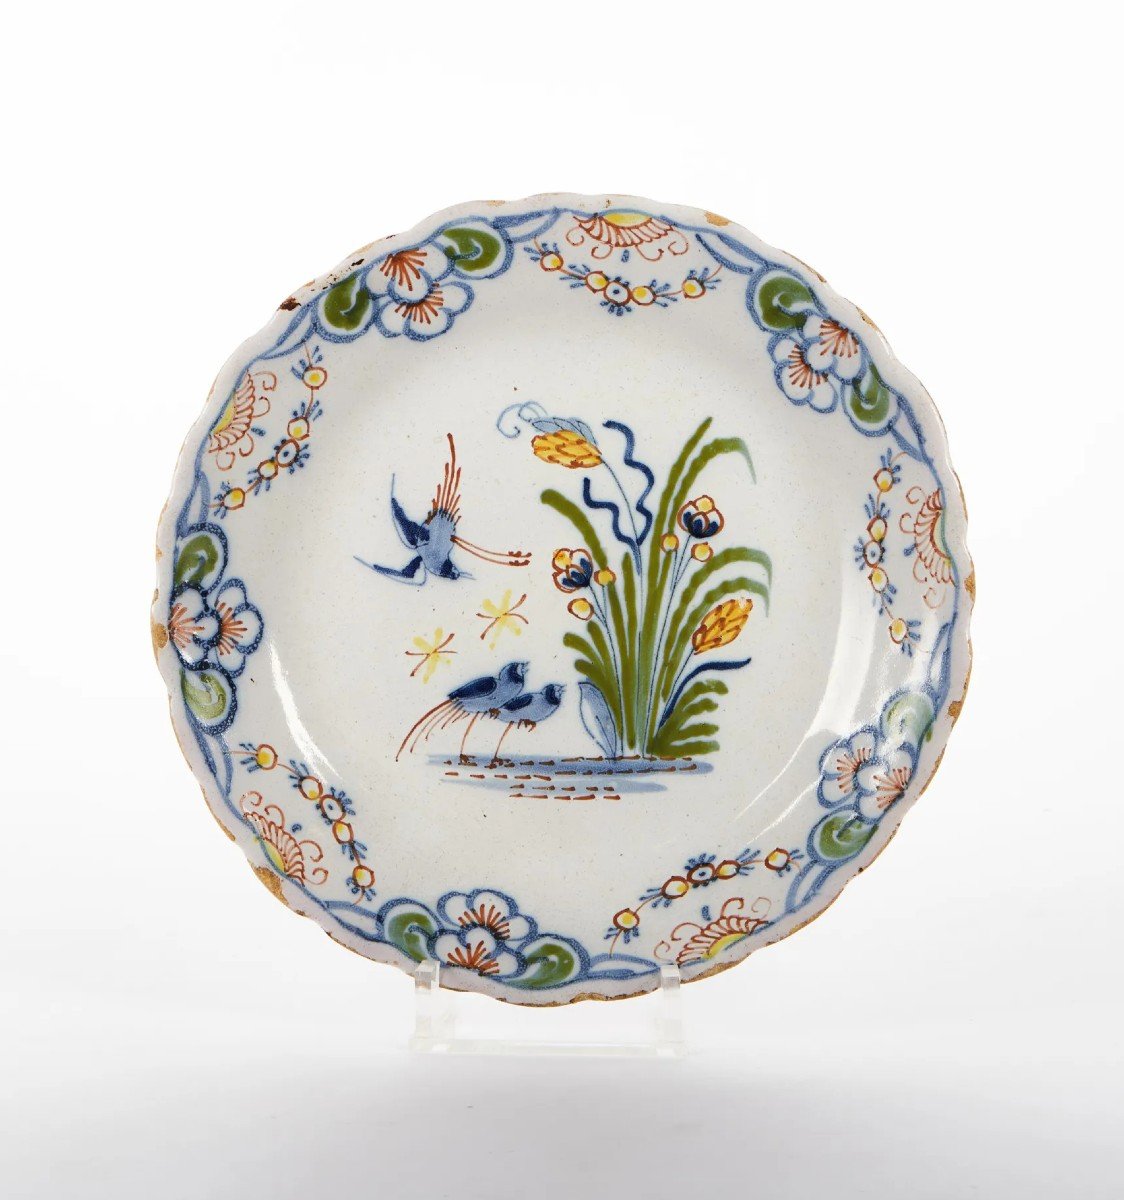 Rare Earthenware Plate From Lille With Polychrome Decoration Of Three Birds On A Body Of Water XVIII